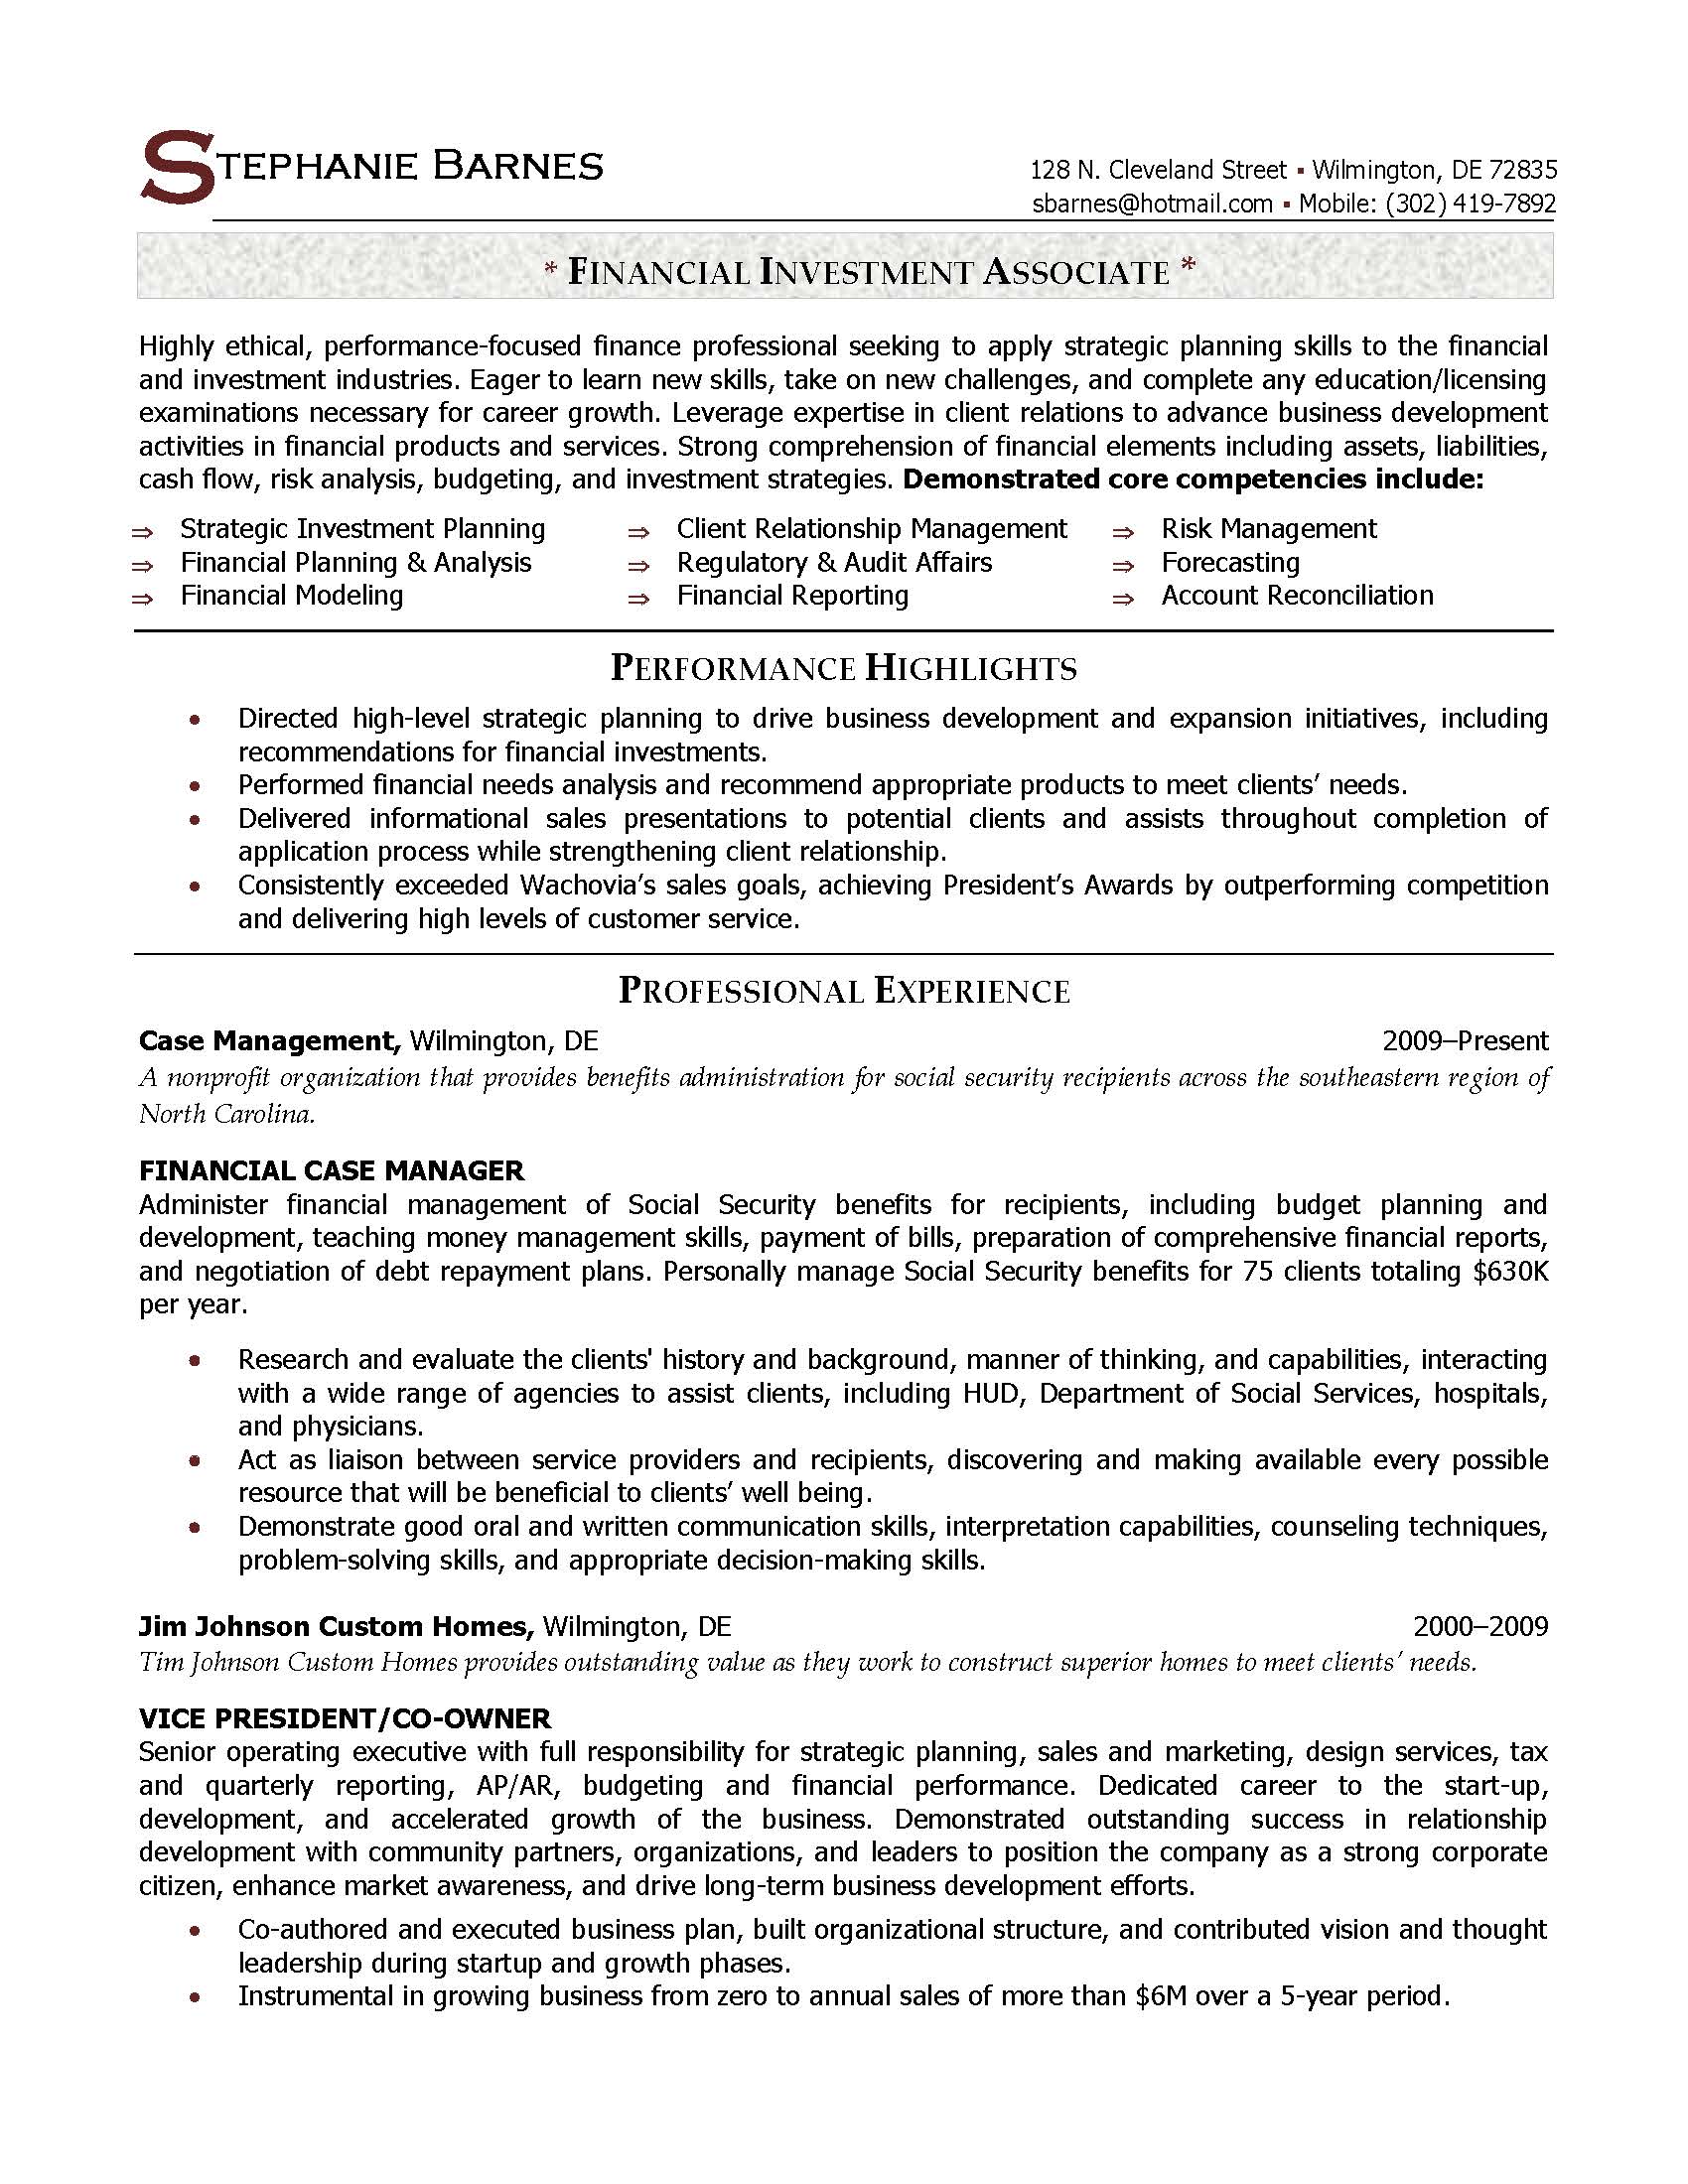 financial investment associate resume sample, provided by Elite Resume Writing Services